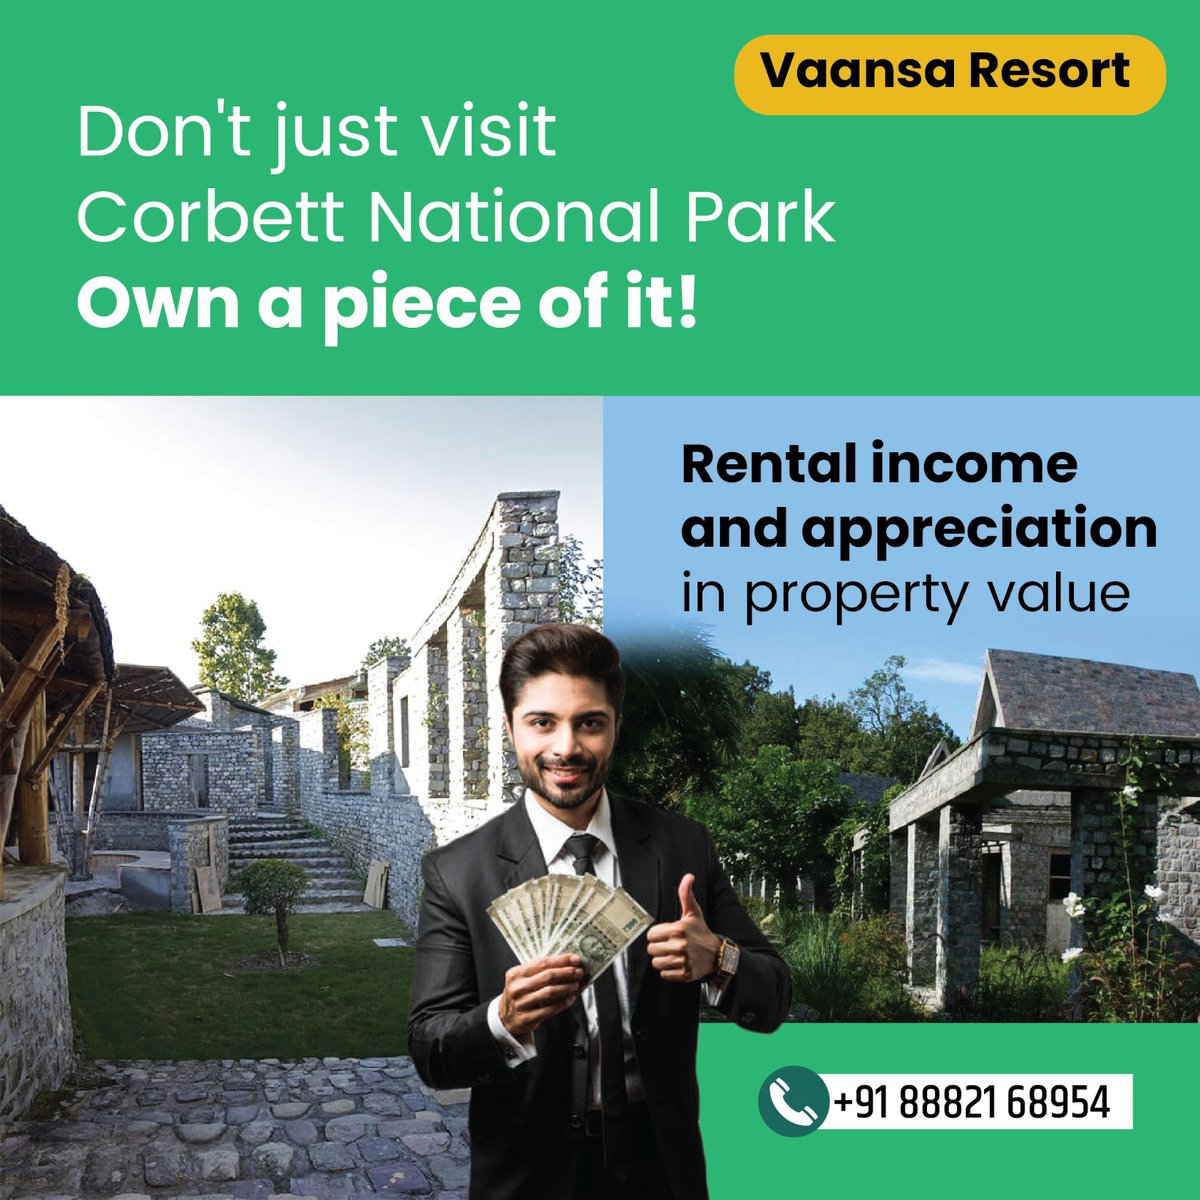 Don't just visit Corbett National Park
Call - +918882168954 
#properties #realestate #property #realtor #forsale #investment #househunting #home #newhome #realty #luxuryhomes #homes #propertyinvestment #homesale #selling #realestateinvesting #investmentproperty